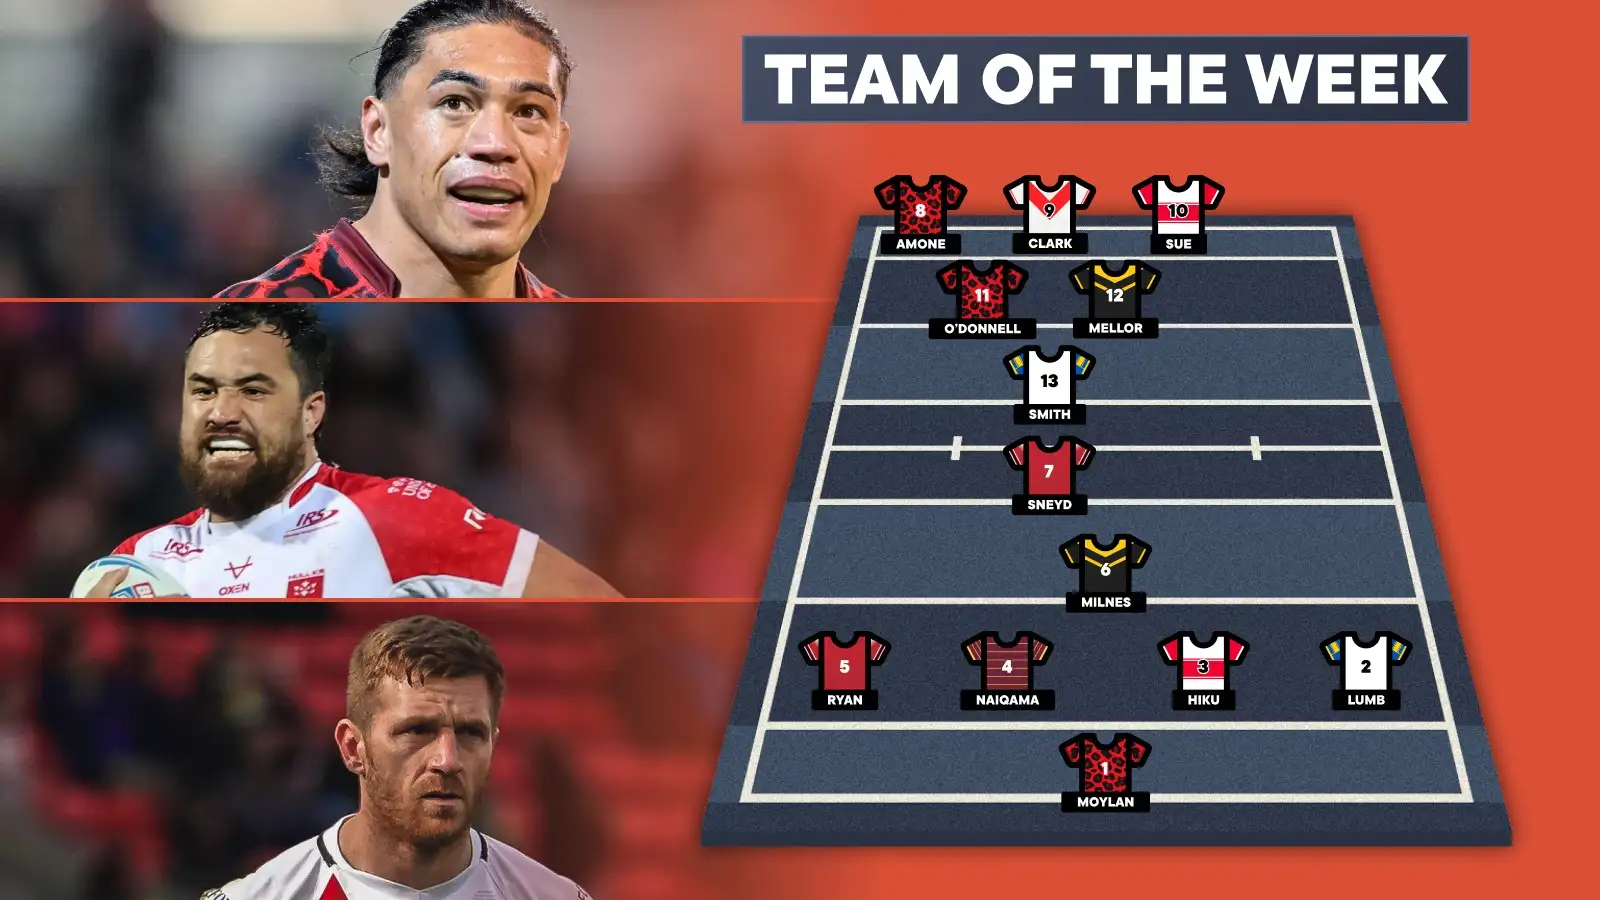 Leigh Leopards trio included in Super League Team of the Week with 7 clubs represented